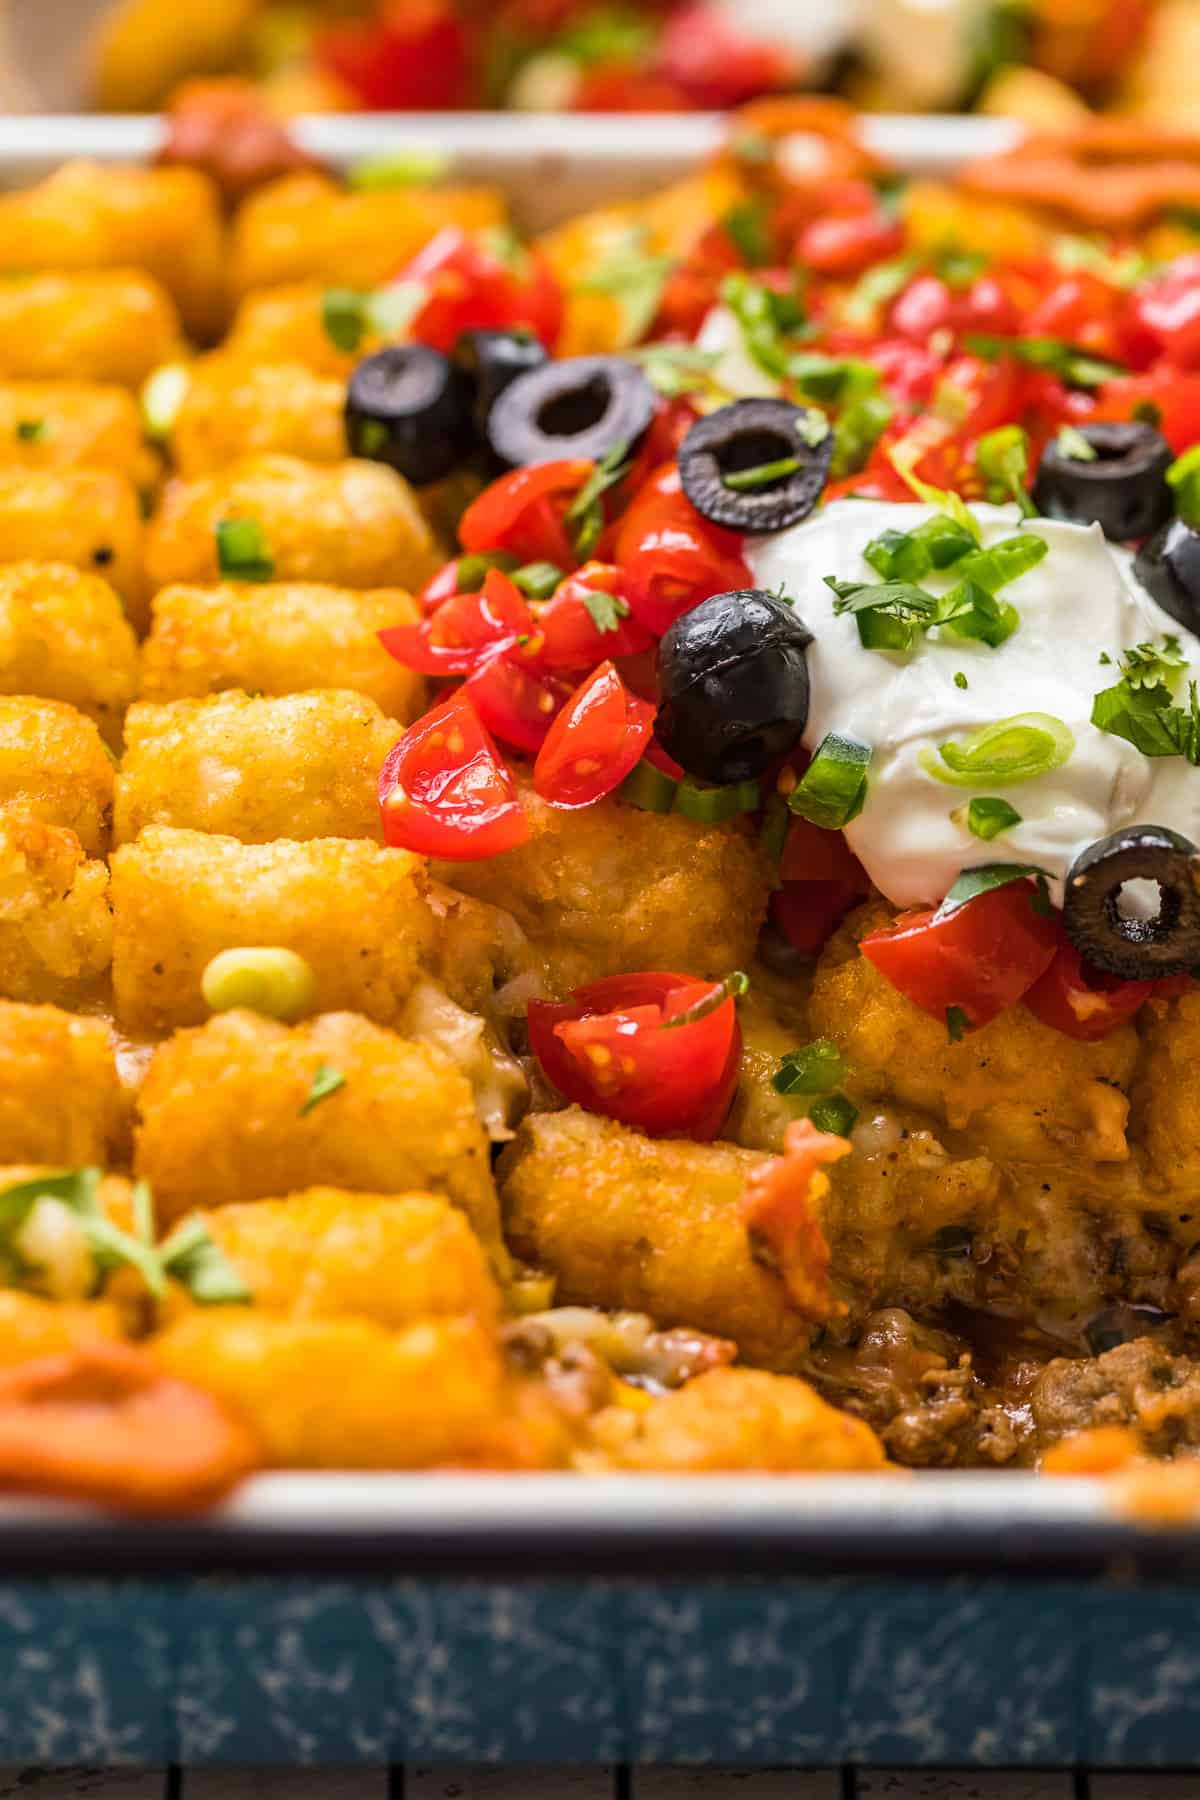 sliced olives and tomatoes on mexican tater tot casserole